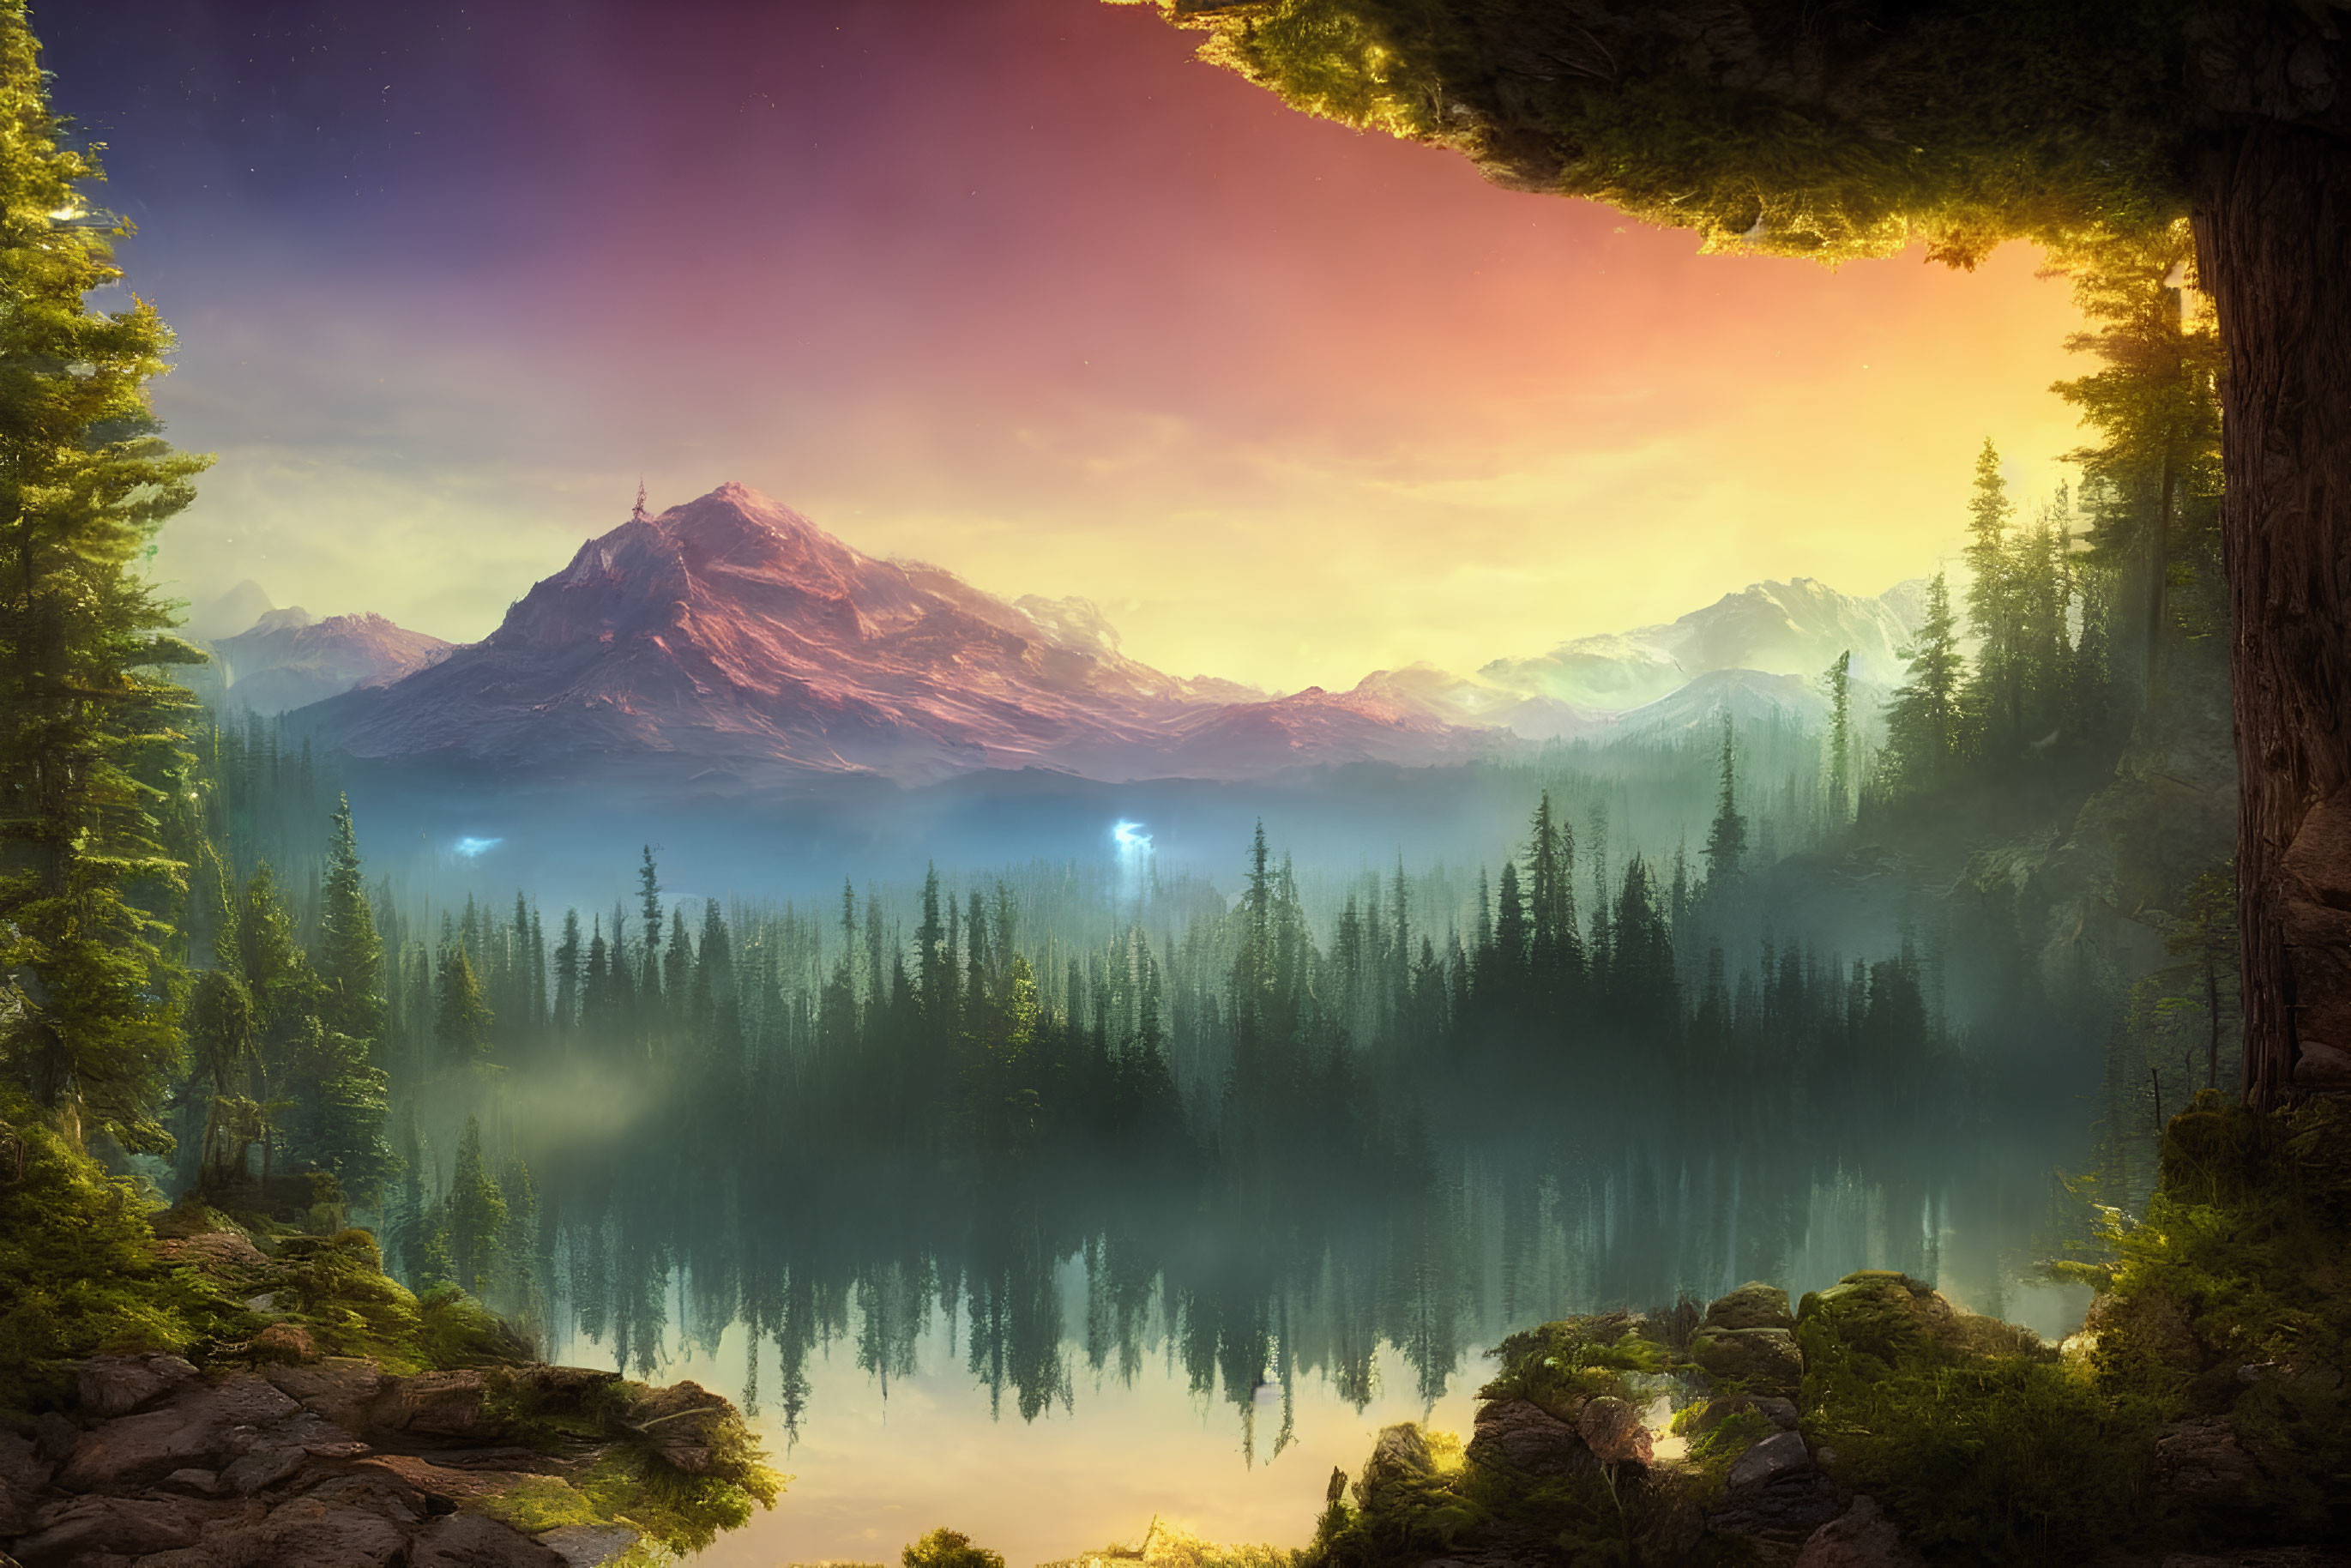 Tranquil landscape with forest, reflective lake, mist, mountains, twilight sky, vibrant clouds.